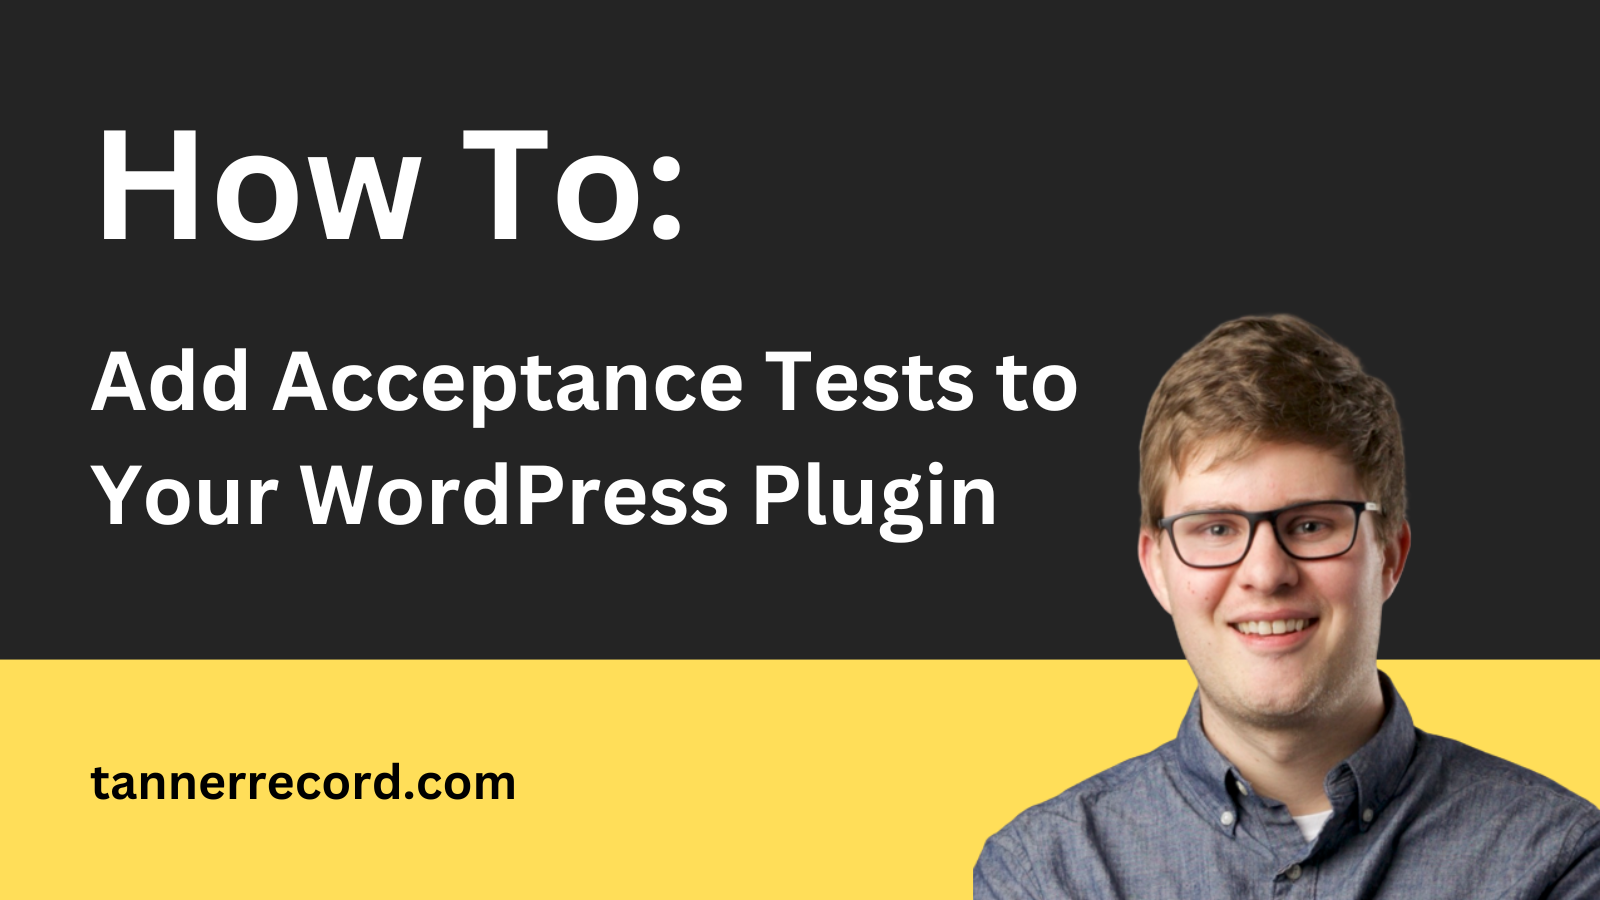 SWPD #010: How to Add Acceptance Tests to Your WordPress Plugin